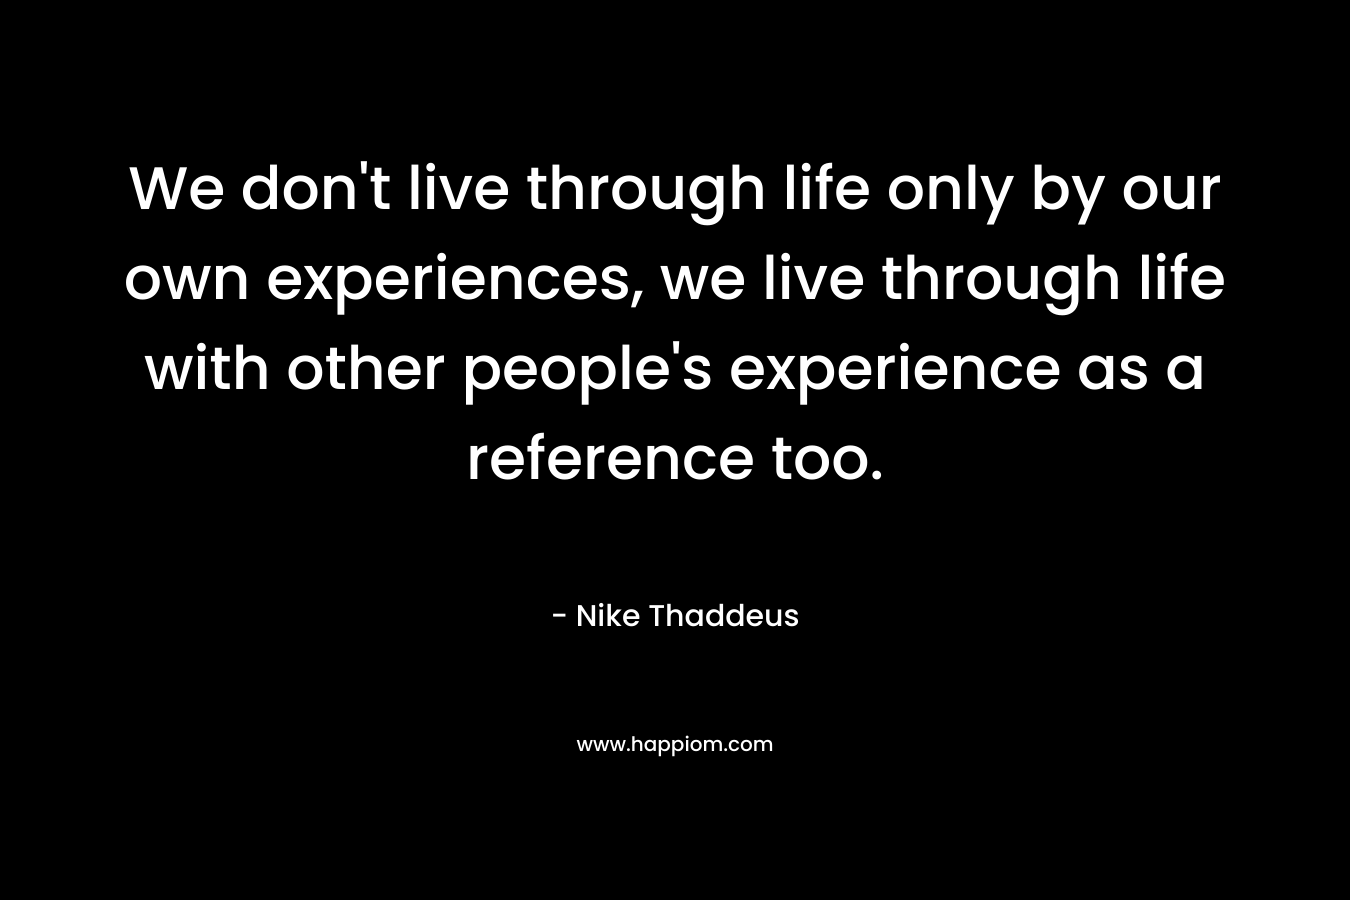 We don't live through life only by our own experiences, we live through life with other people's experience as a reference too.